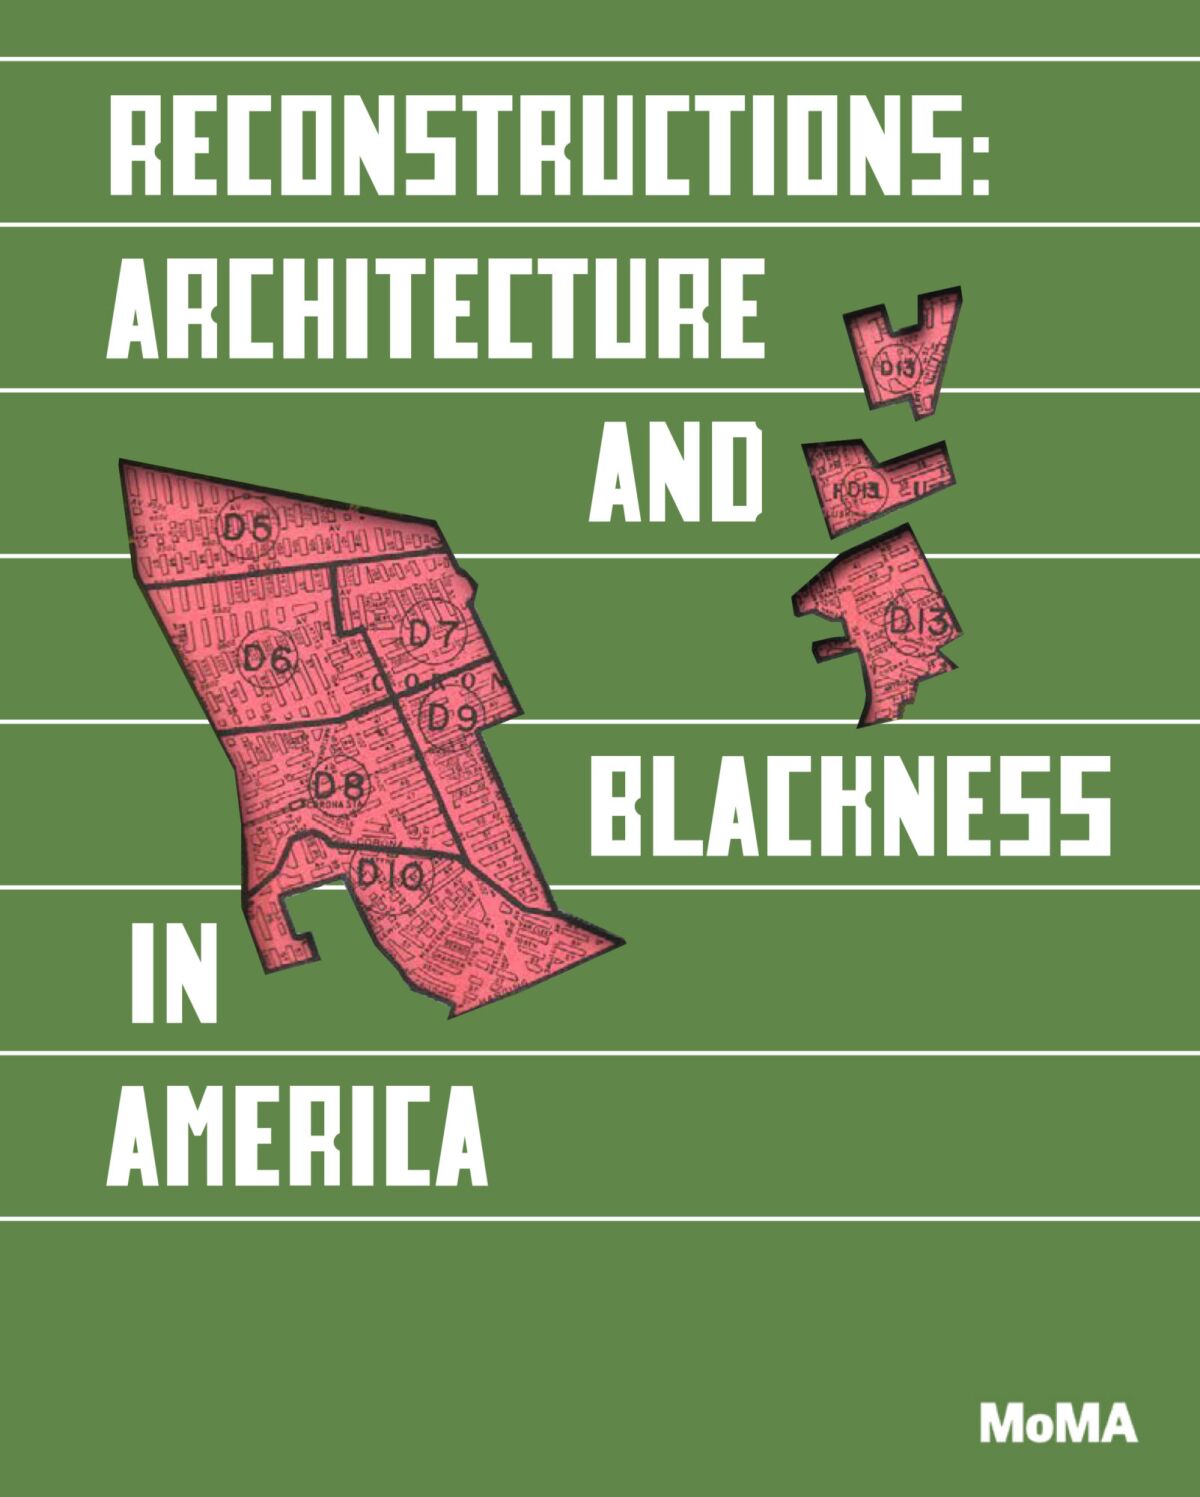 A green book cover with the title "Reconstructions" includes fragments of a redlined neighborhood map